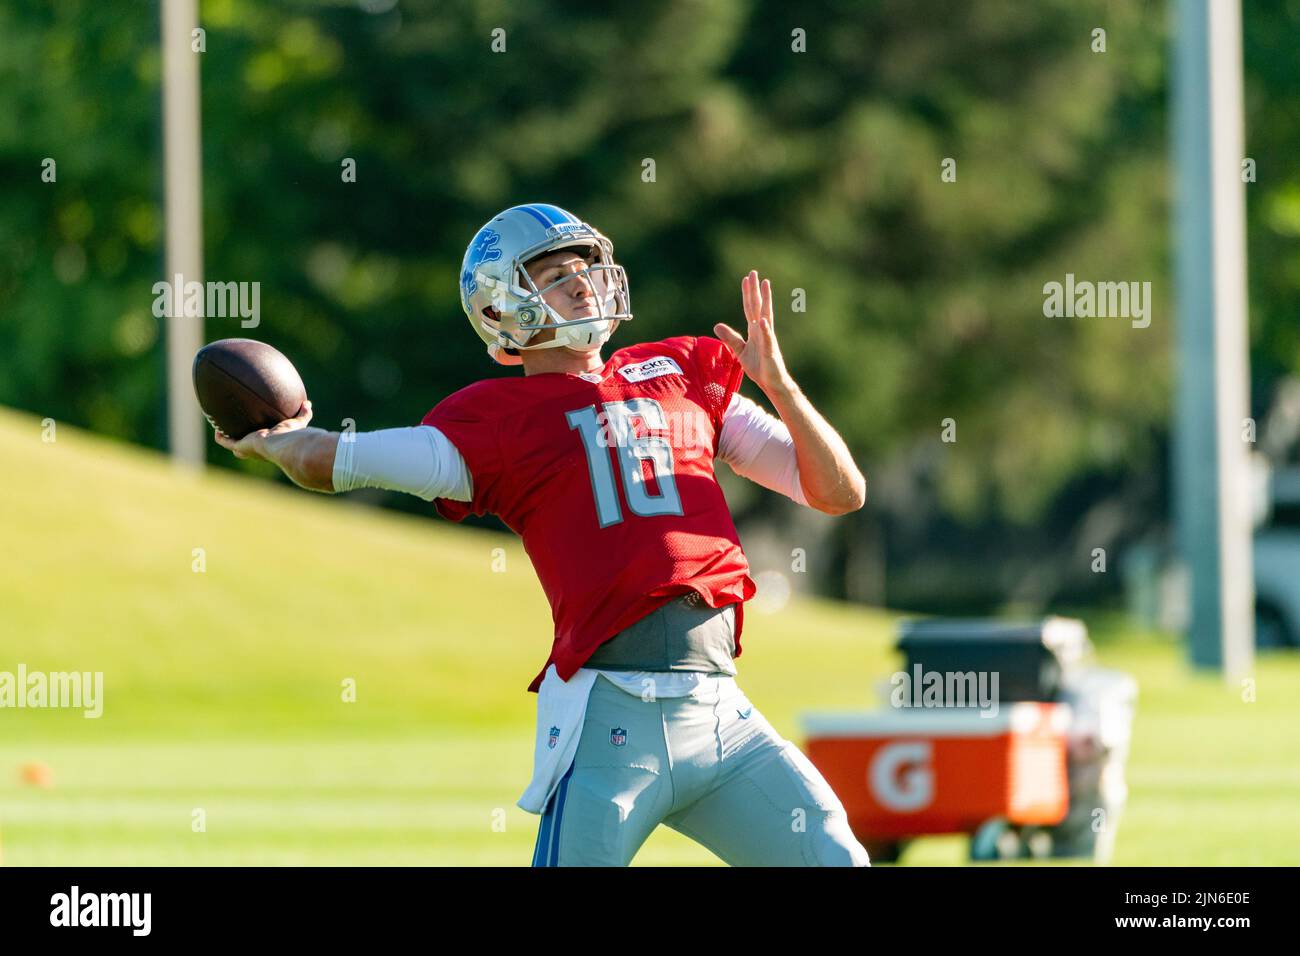 ALLEN PARK, MI - AUGUST 09: Detroit Lions QB Jared Goff (16) in action during Lions training camp on August 9, 2022 at Detroiit Lions Training Facility in Allen Park, MI (Photo by Allan Dranberg/CSM) Credit: Cal Sport Media/Alamy Live News Stock Photo